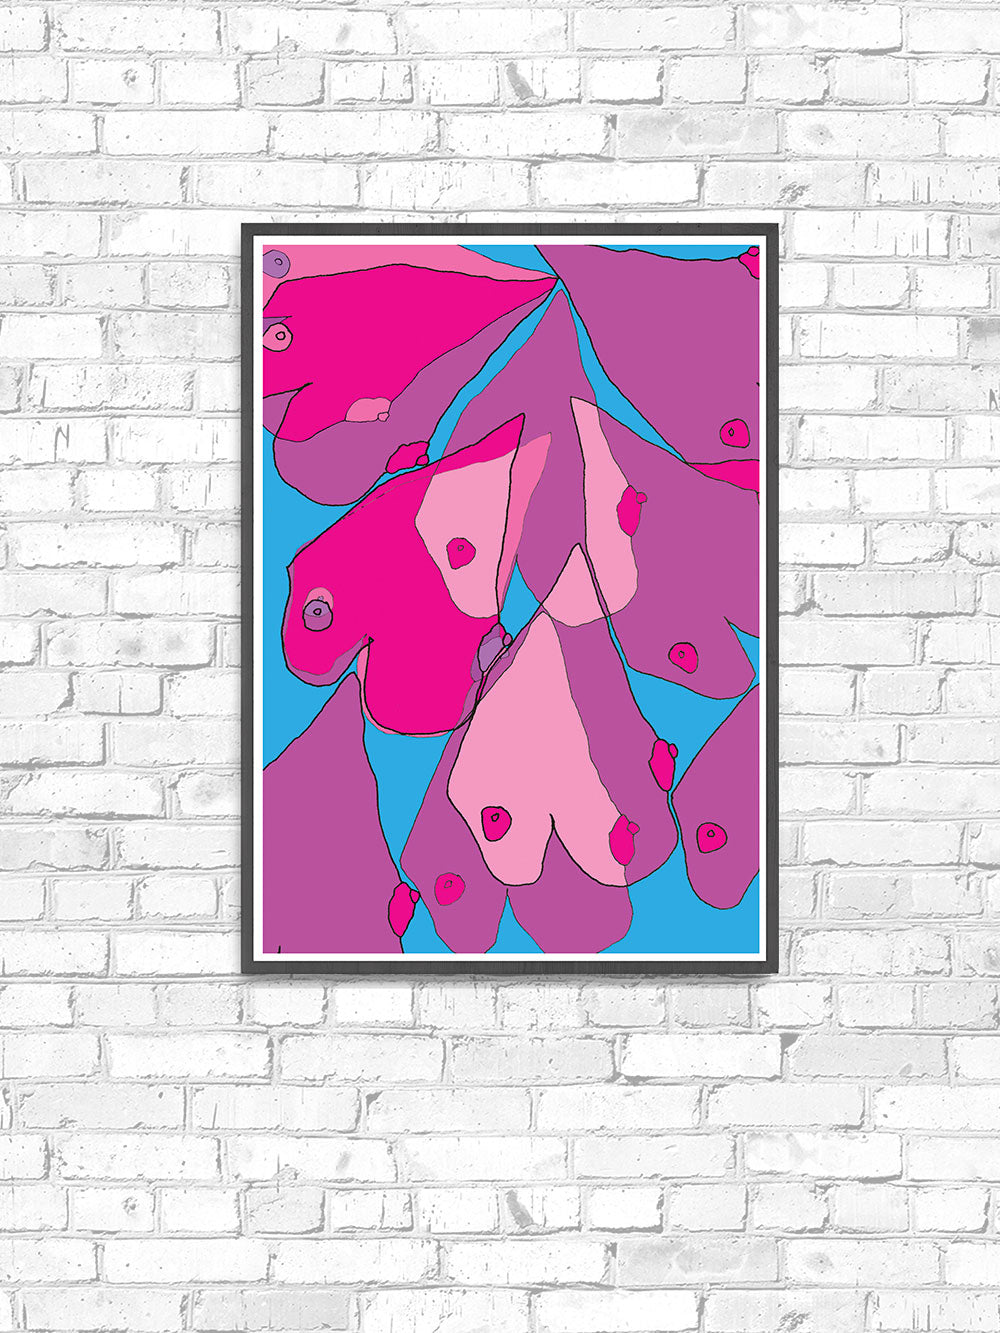 Tits Up Nude Abstract Illustration on a wall